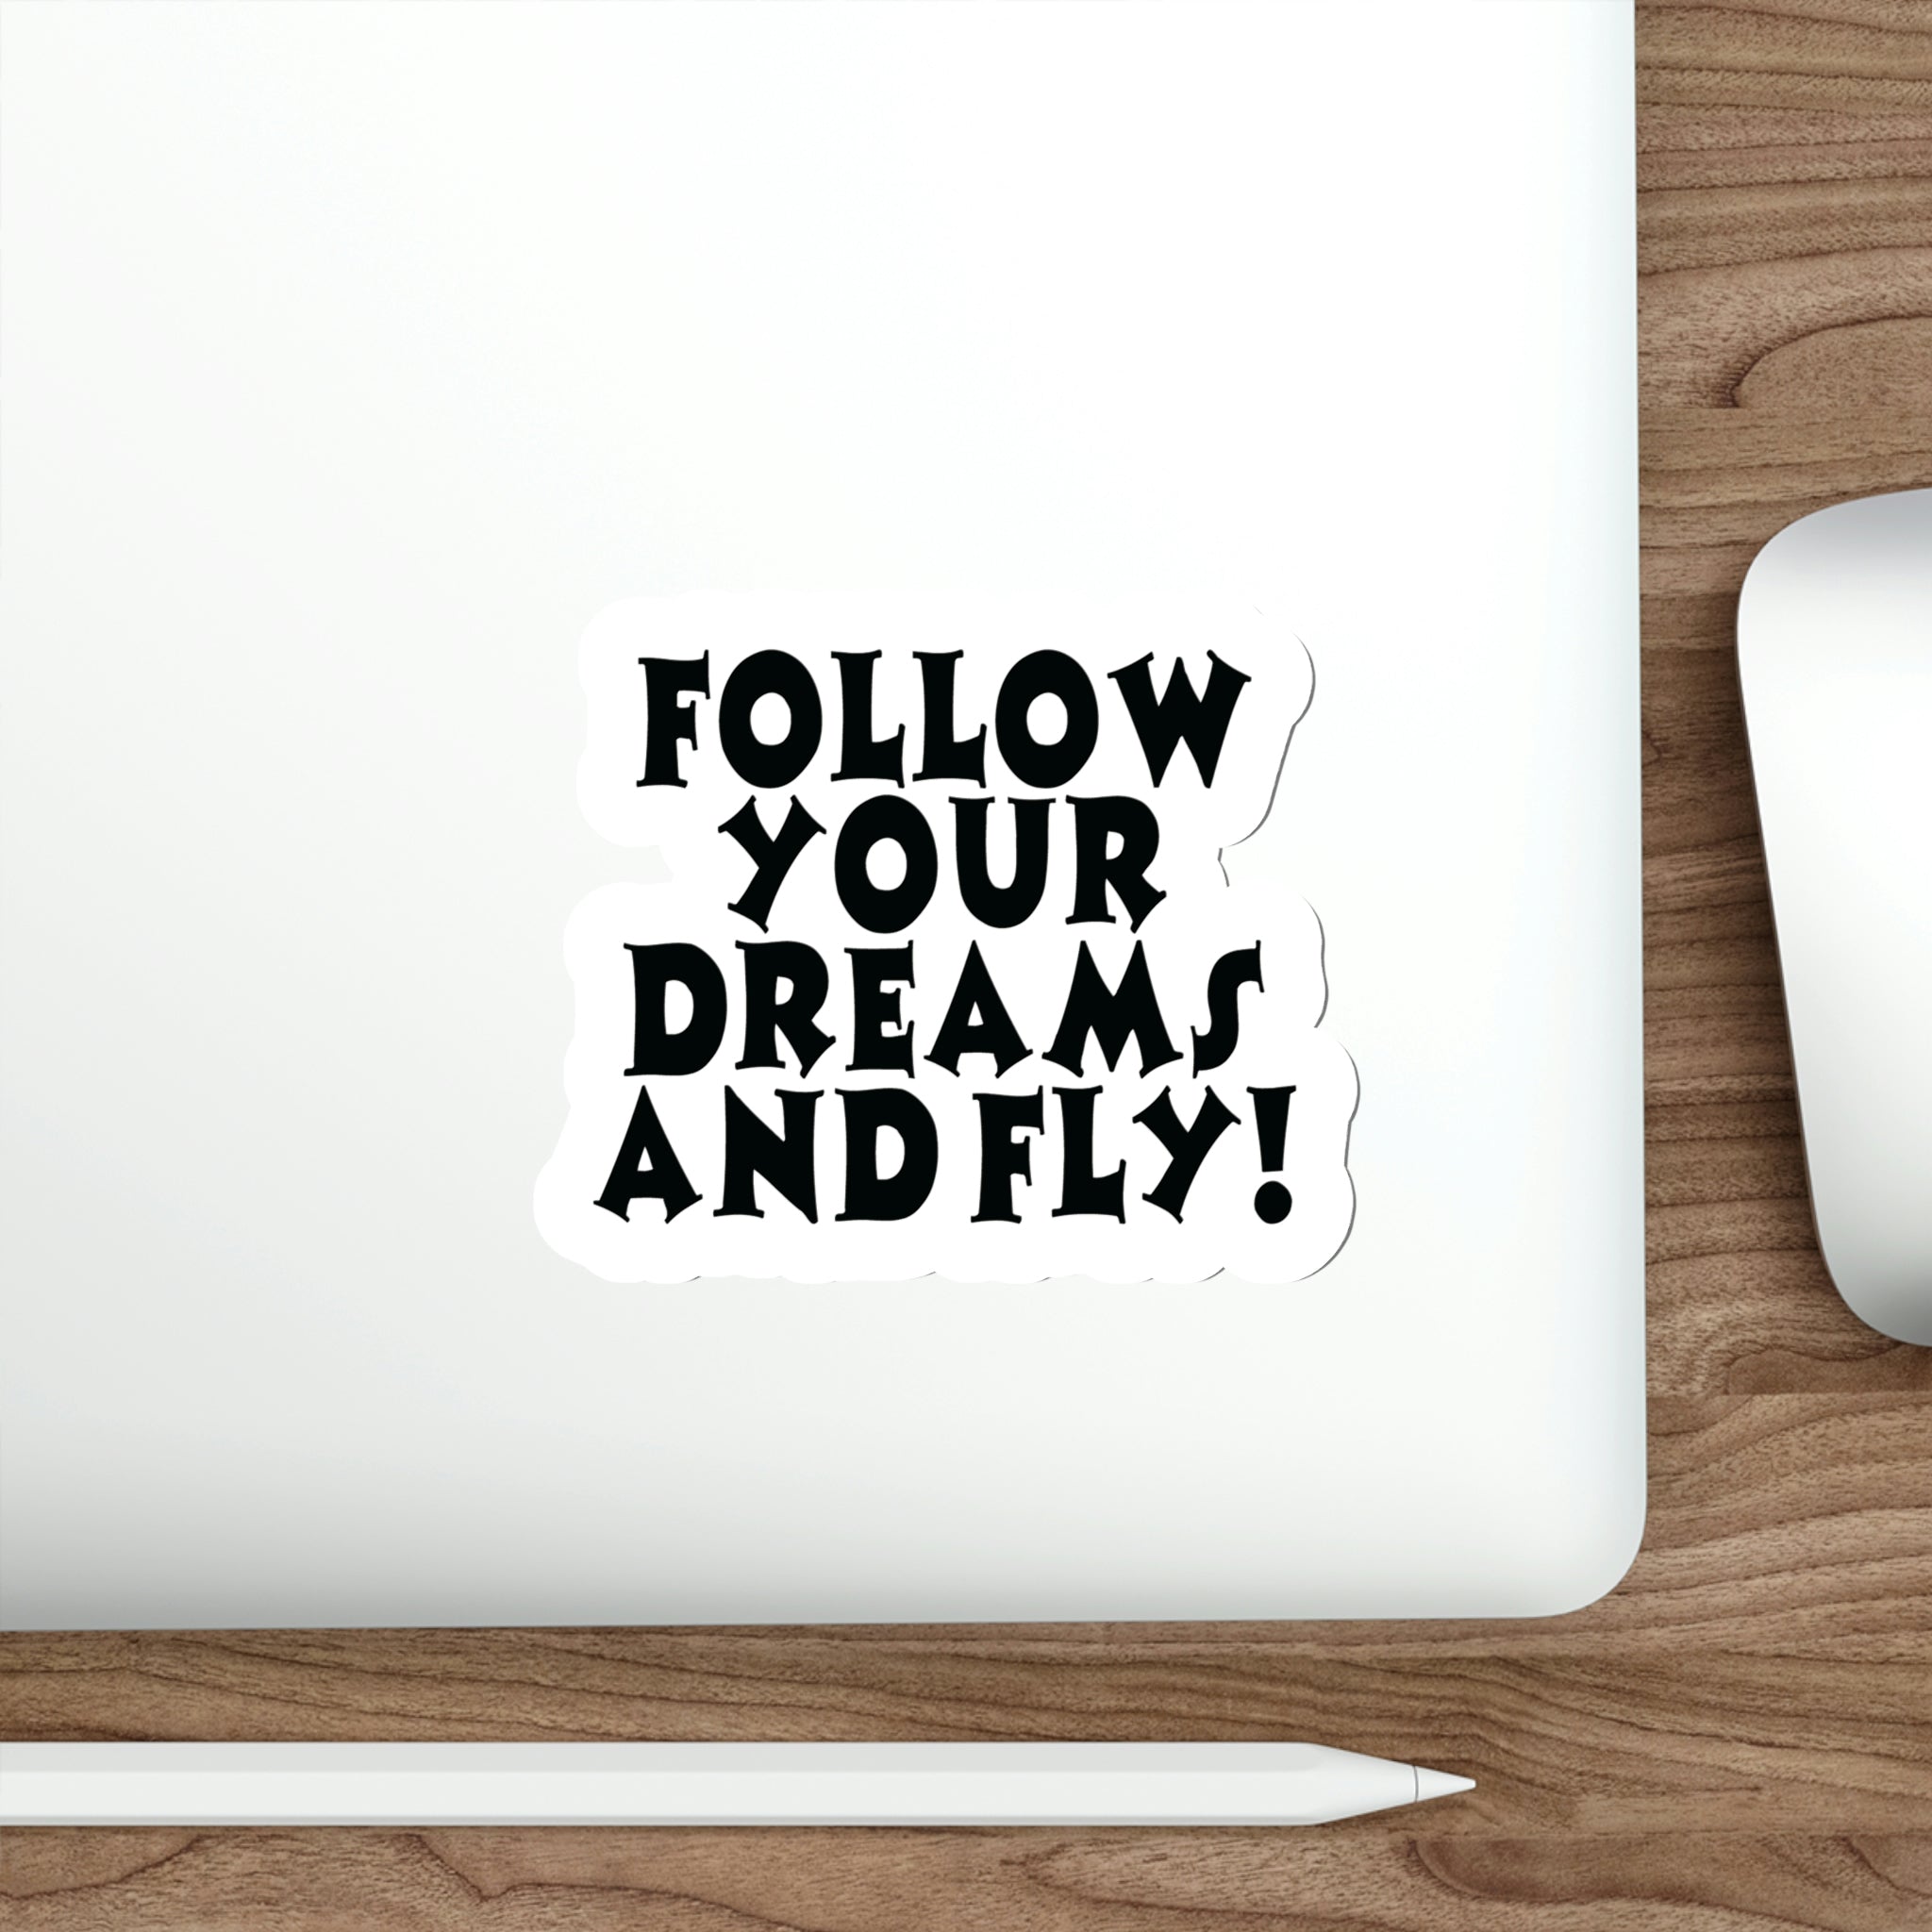 Customize Your Life - Follow Your Dreams & Fly with Our Stickers! #size_6x6-inches